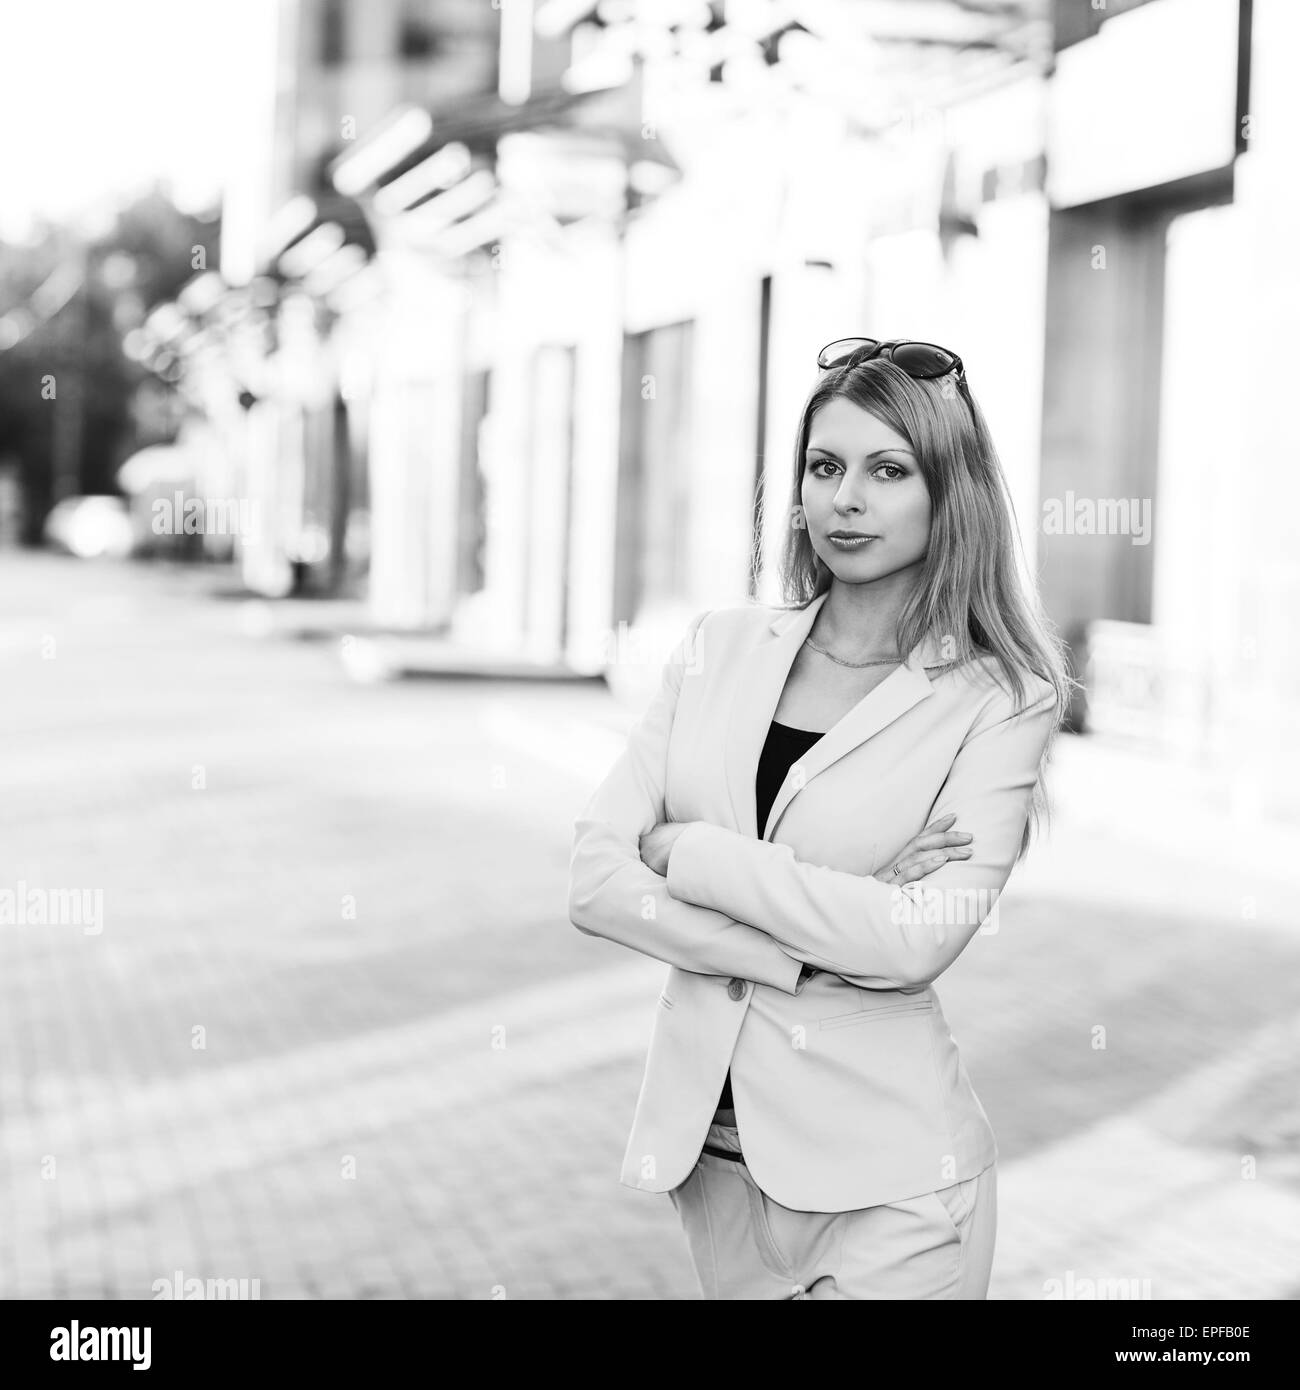 portrait of an executive young woman Stock Photo